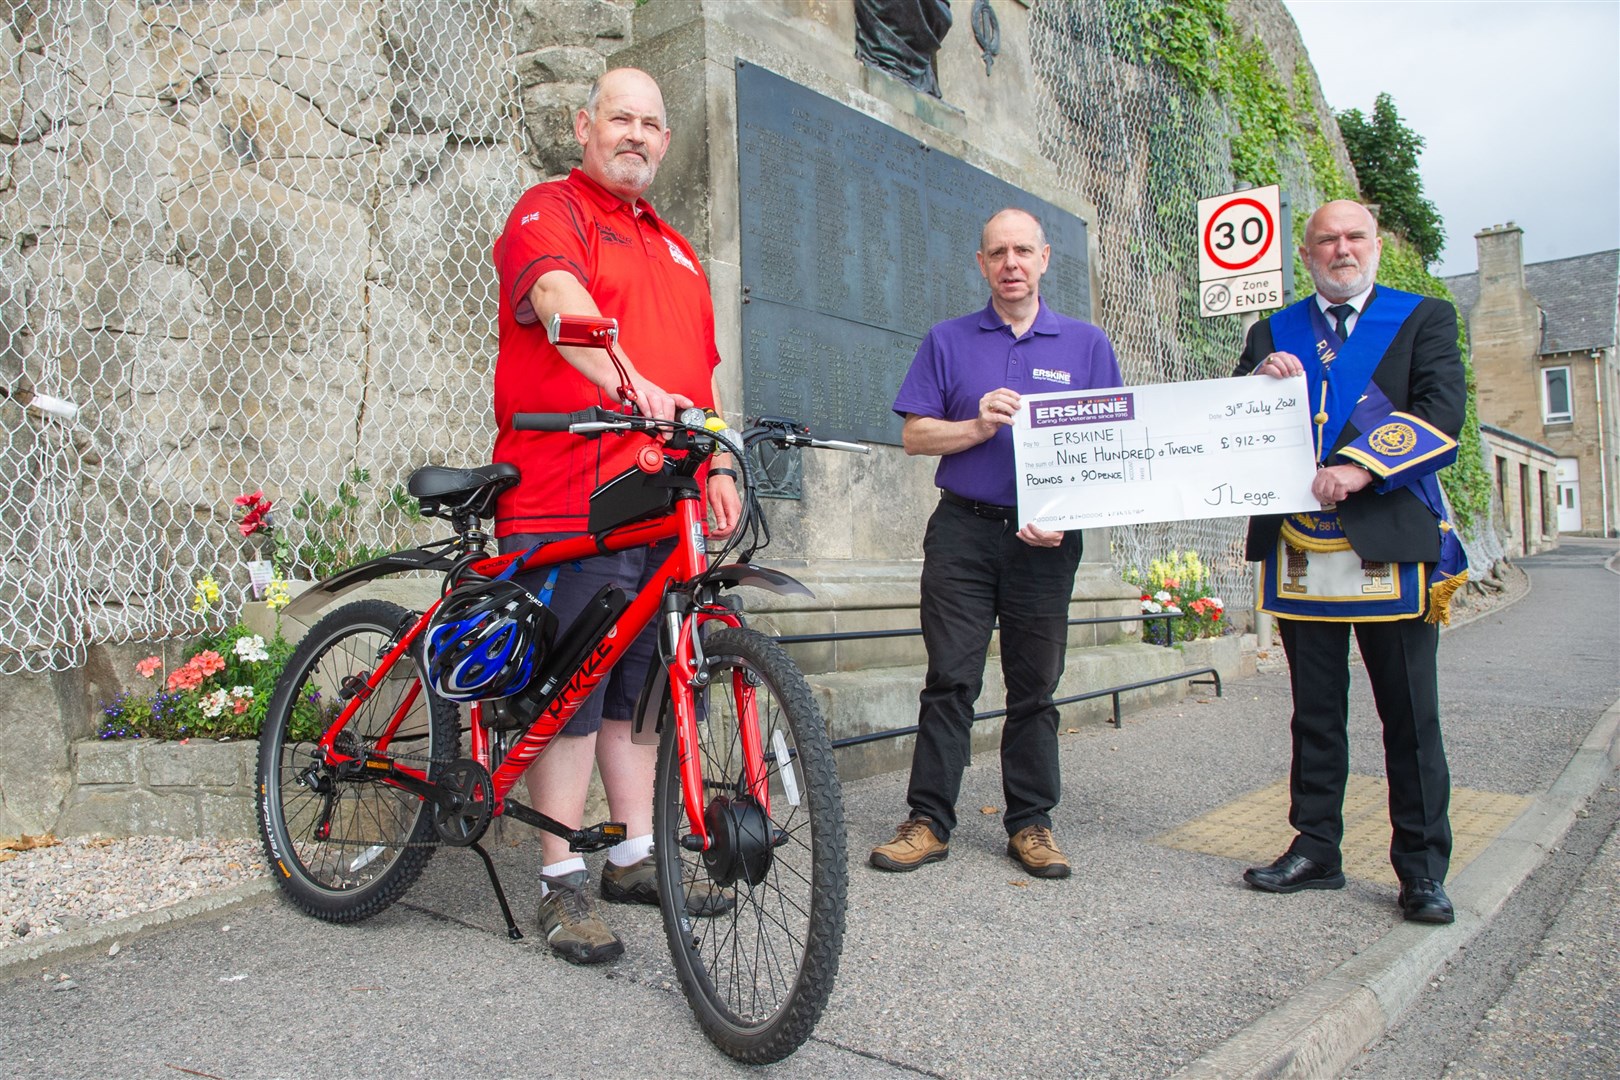 Jim Legge has cycled 681 miles for the Erskine Veterans charity. Also pictured are Michael Jamieson (Erskine community fundraiser) and Keith Beaumont (Master of the Pitgavney Lodge). Picture: Daniel Forsyth..